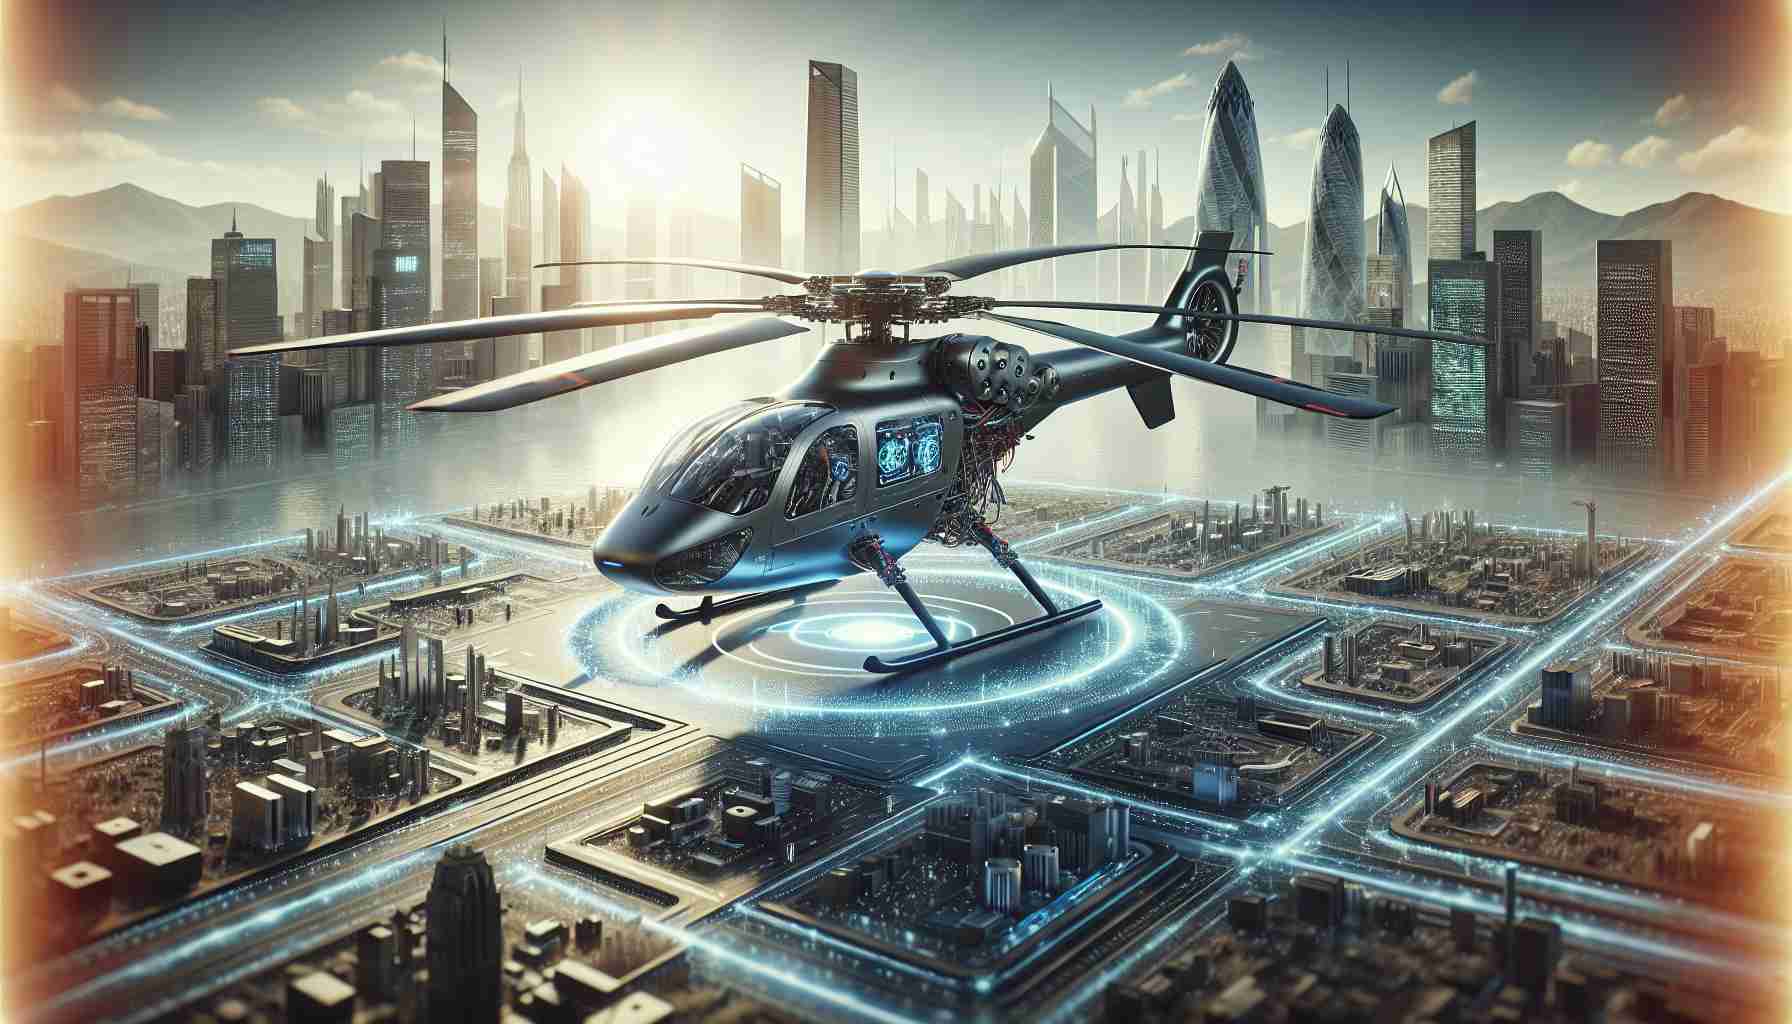 Create a realistic and detailed High Definition image that depicts the future of helicopter technology showcasing innovative advancements. The scene could contain a next-generation helicopter with advanced blades and engines, demonstrating incredible speed and maneuverability. Prominent technological features could possibly include AI-based cockpit controls, electric powertrains for environmental sustainability and advanced lightweight materials for construction. Perhaps there could be a backdrop of a city skyline with state-of-the-art architecture, suggesting the future era of air travel.